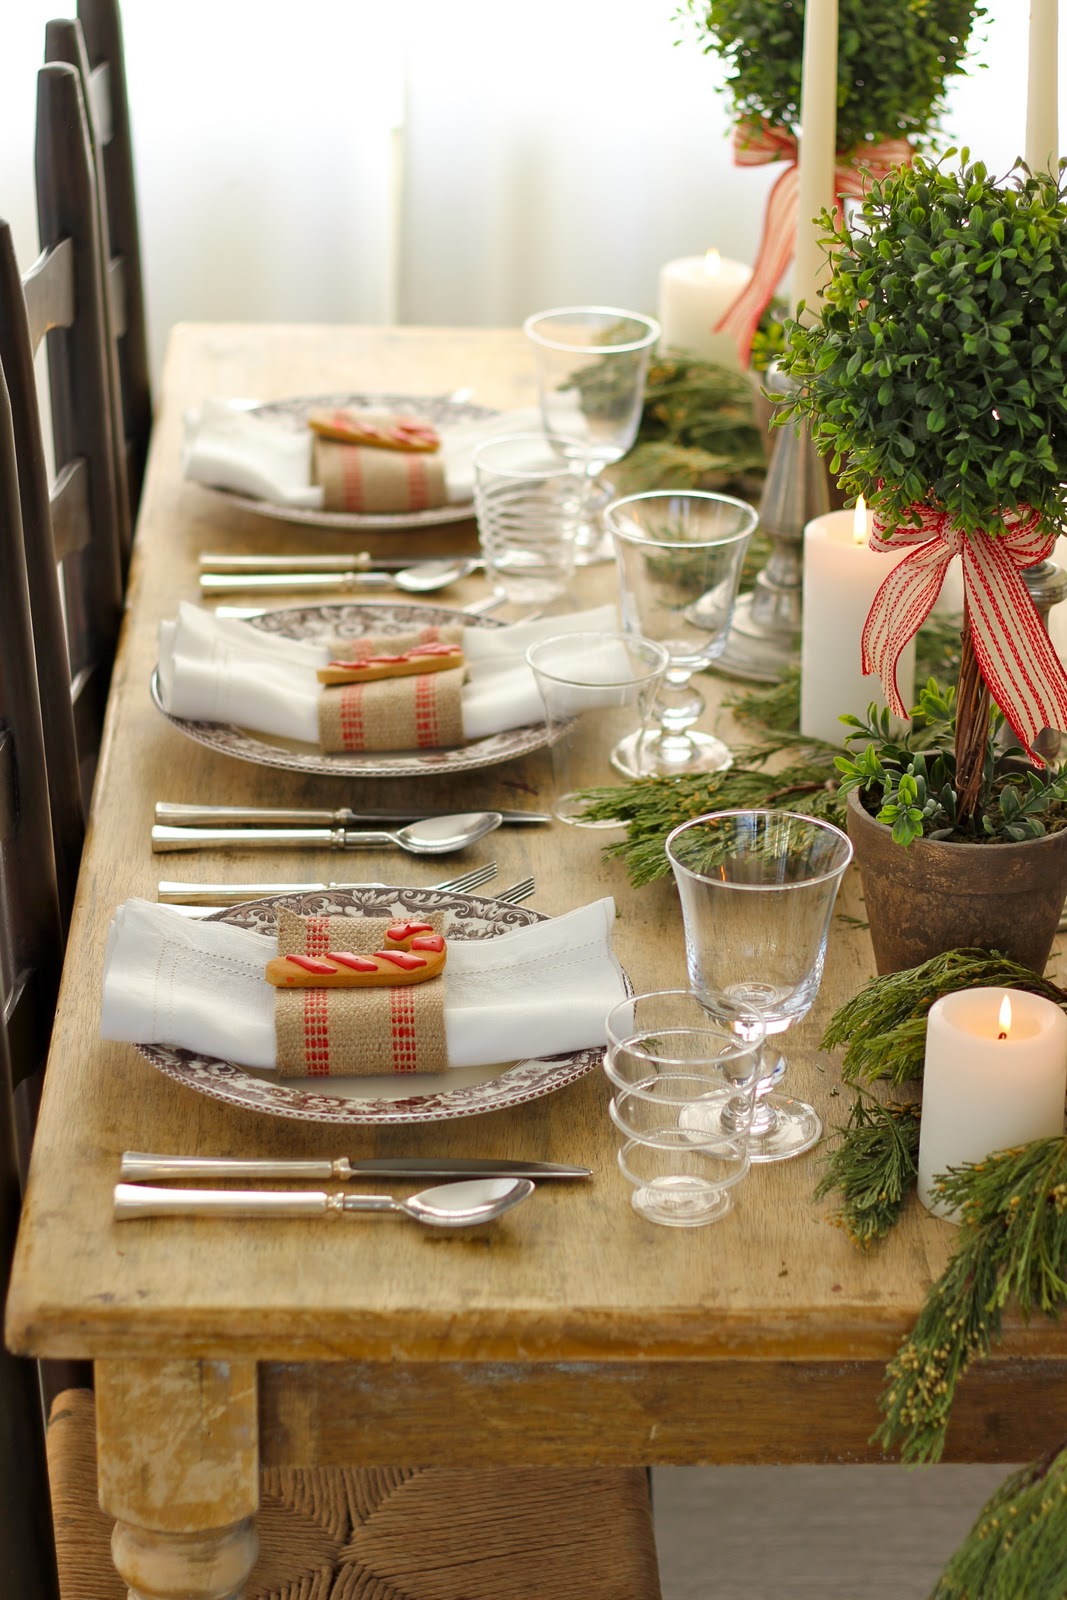 Beautiful Christmas Centerpiece with Adorable Red and White – HomesFeed
